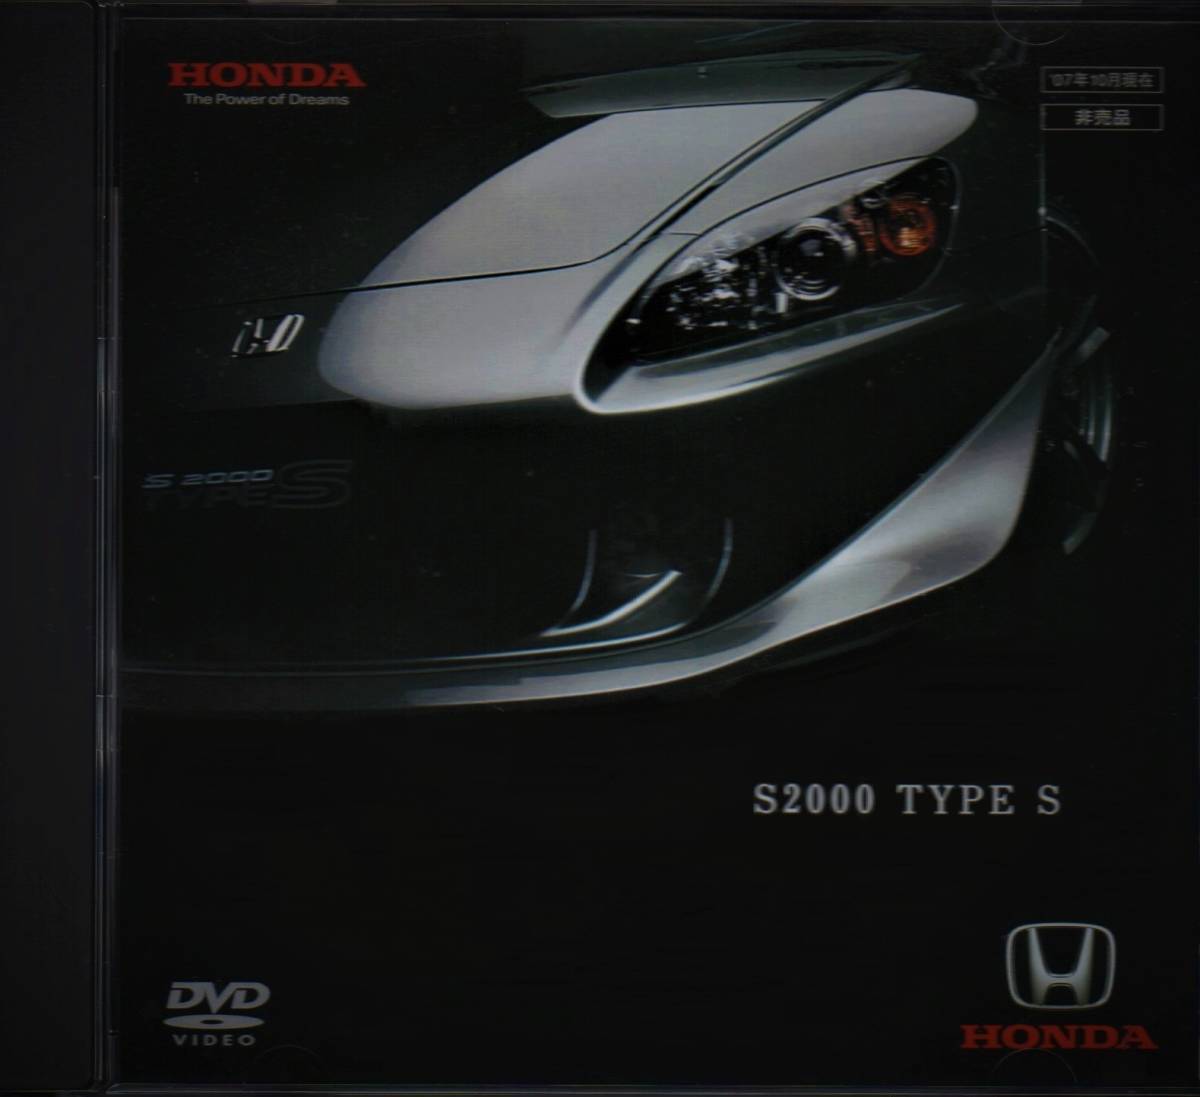 DVD* Honda original not for sale S2000 TYPE S Pro motion .. goods Novelty new goods * unopened 2007 year 10 month version 